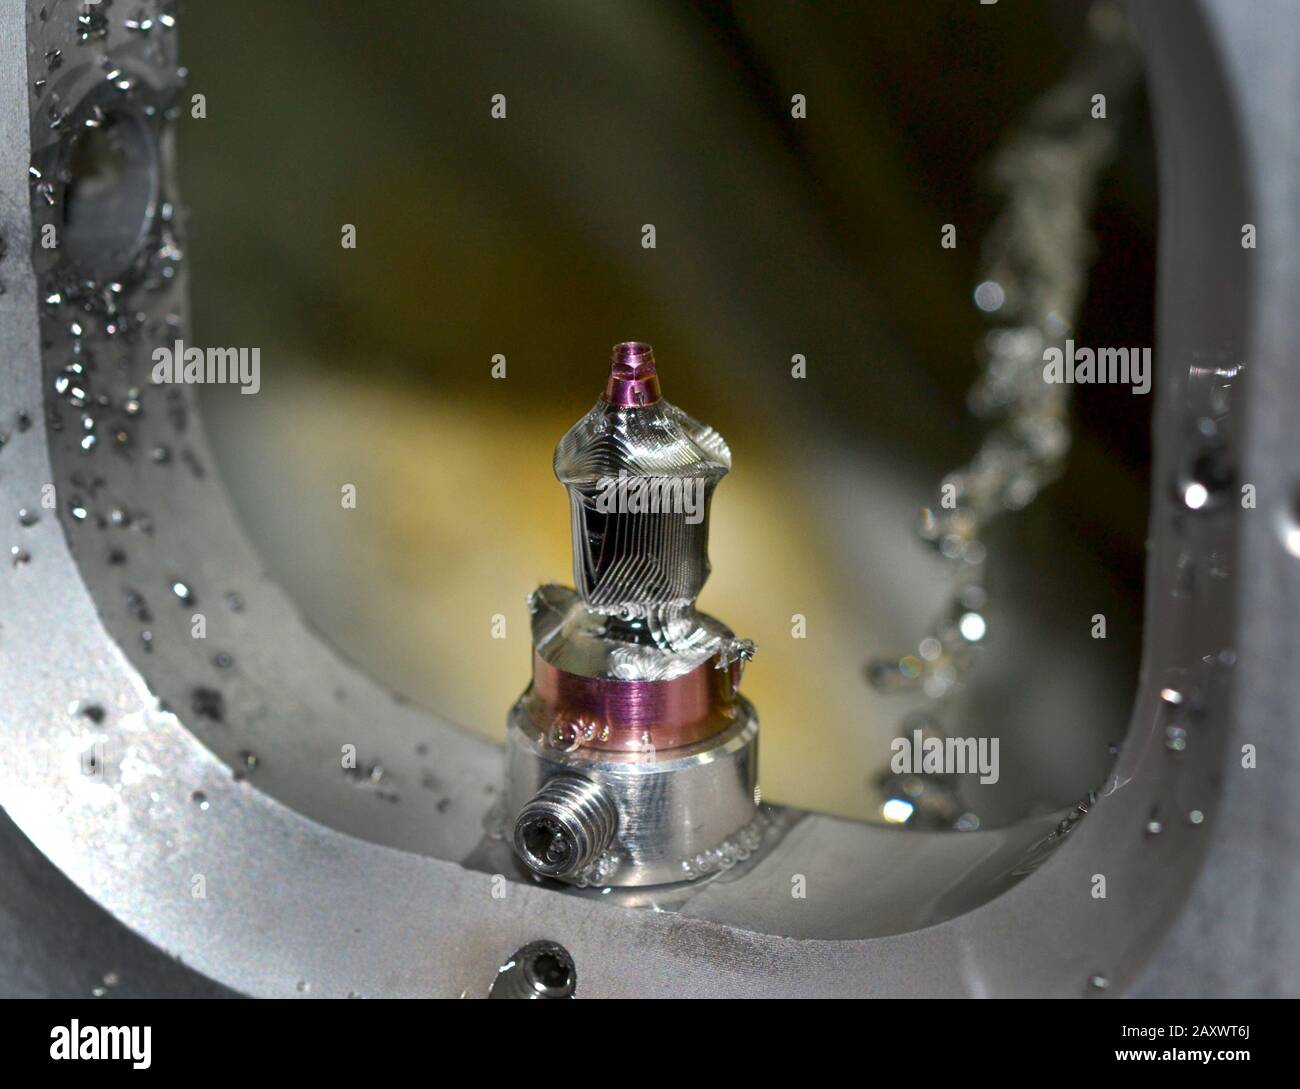 Milling abutment close-up. Cutting and milling of titanium abutment crown base for dental implant. Modern technology cad cam Stock Photo